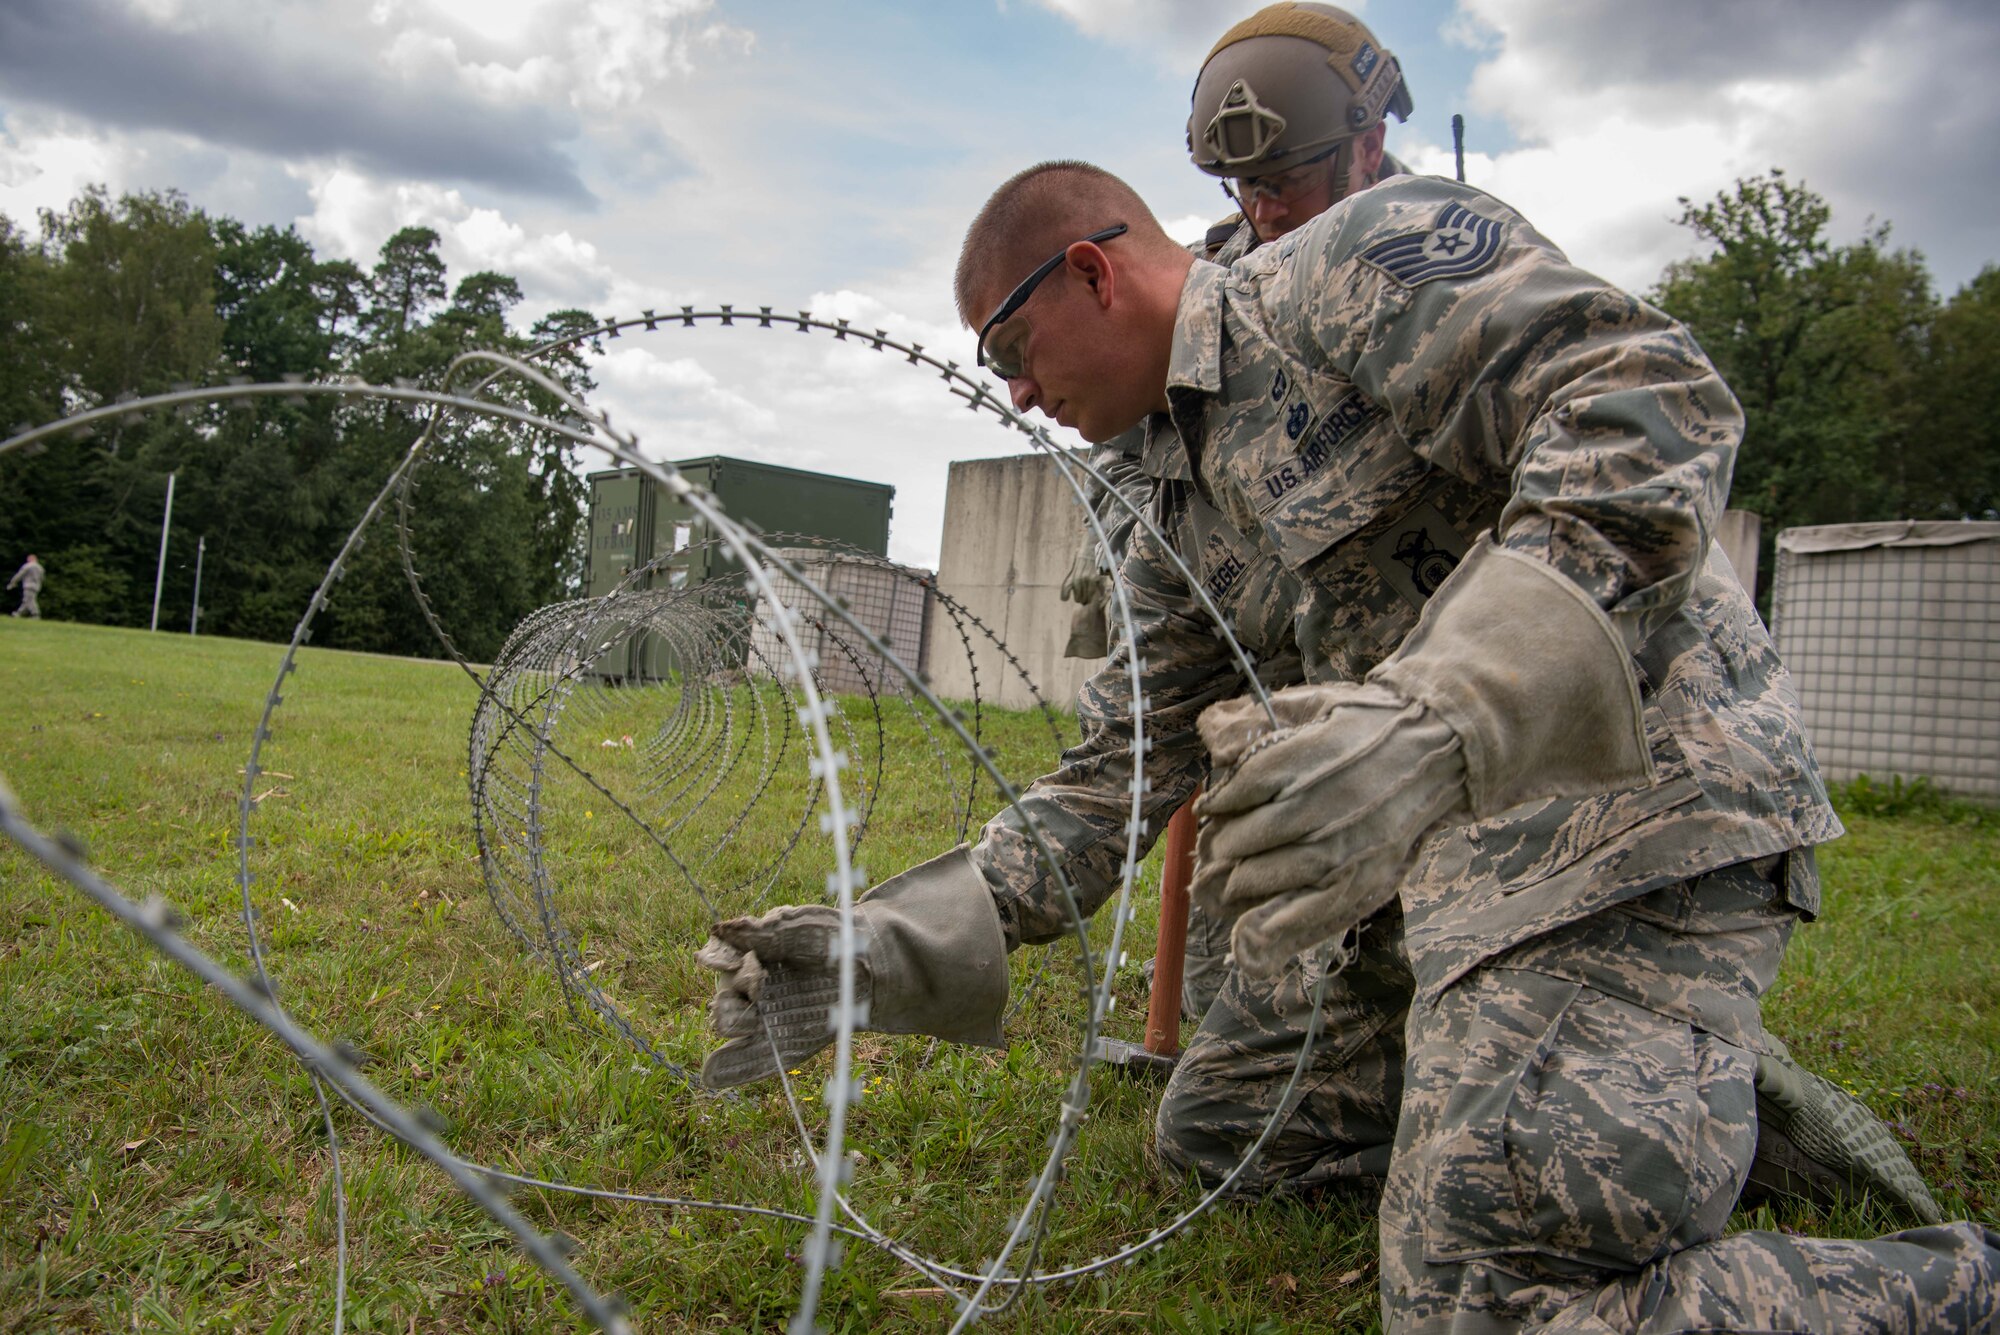 U.S. Air Force Tech. Sgt. Mark Kegel, 435th Security Forces Squadron Phoenix Fist team leader, lays barbed wire around the perimeter of a simulated base during Exercise Lending Hand on Ramstein Air Base, Germany, Aug. 21, 2017.